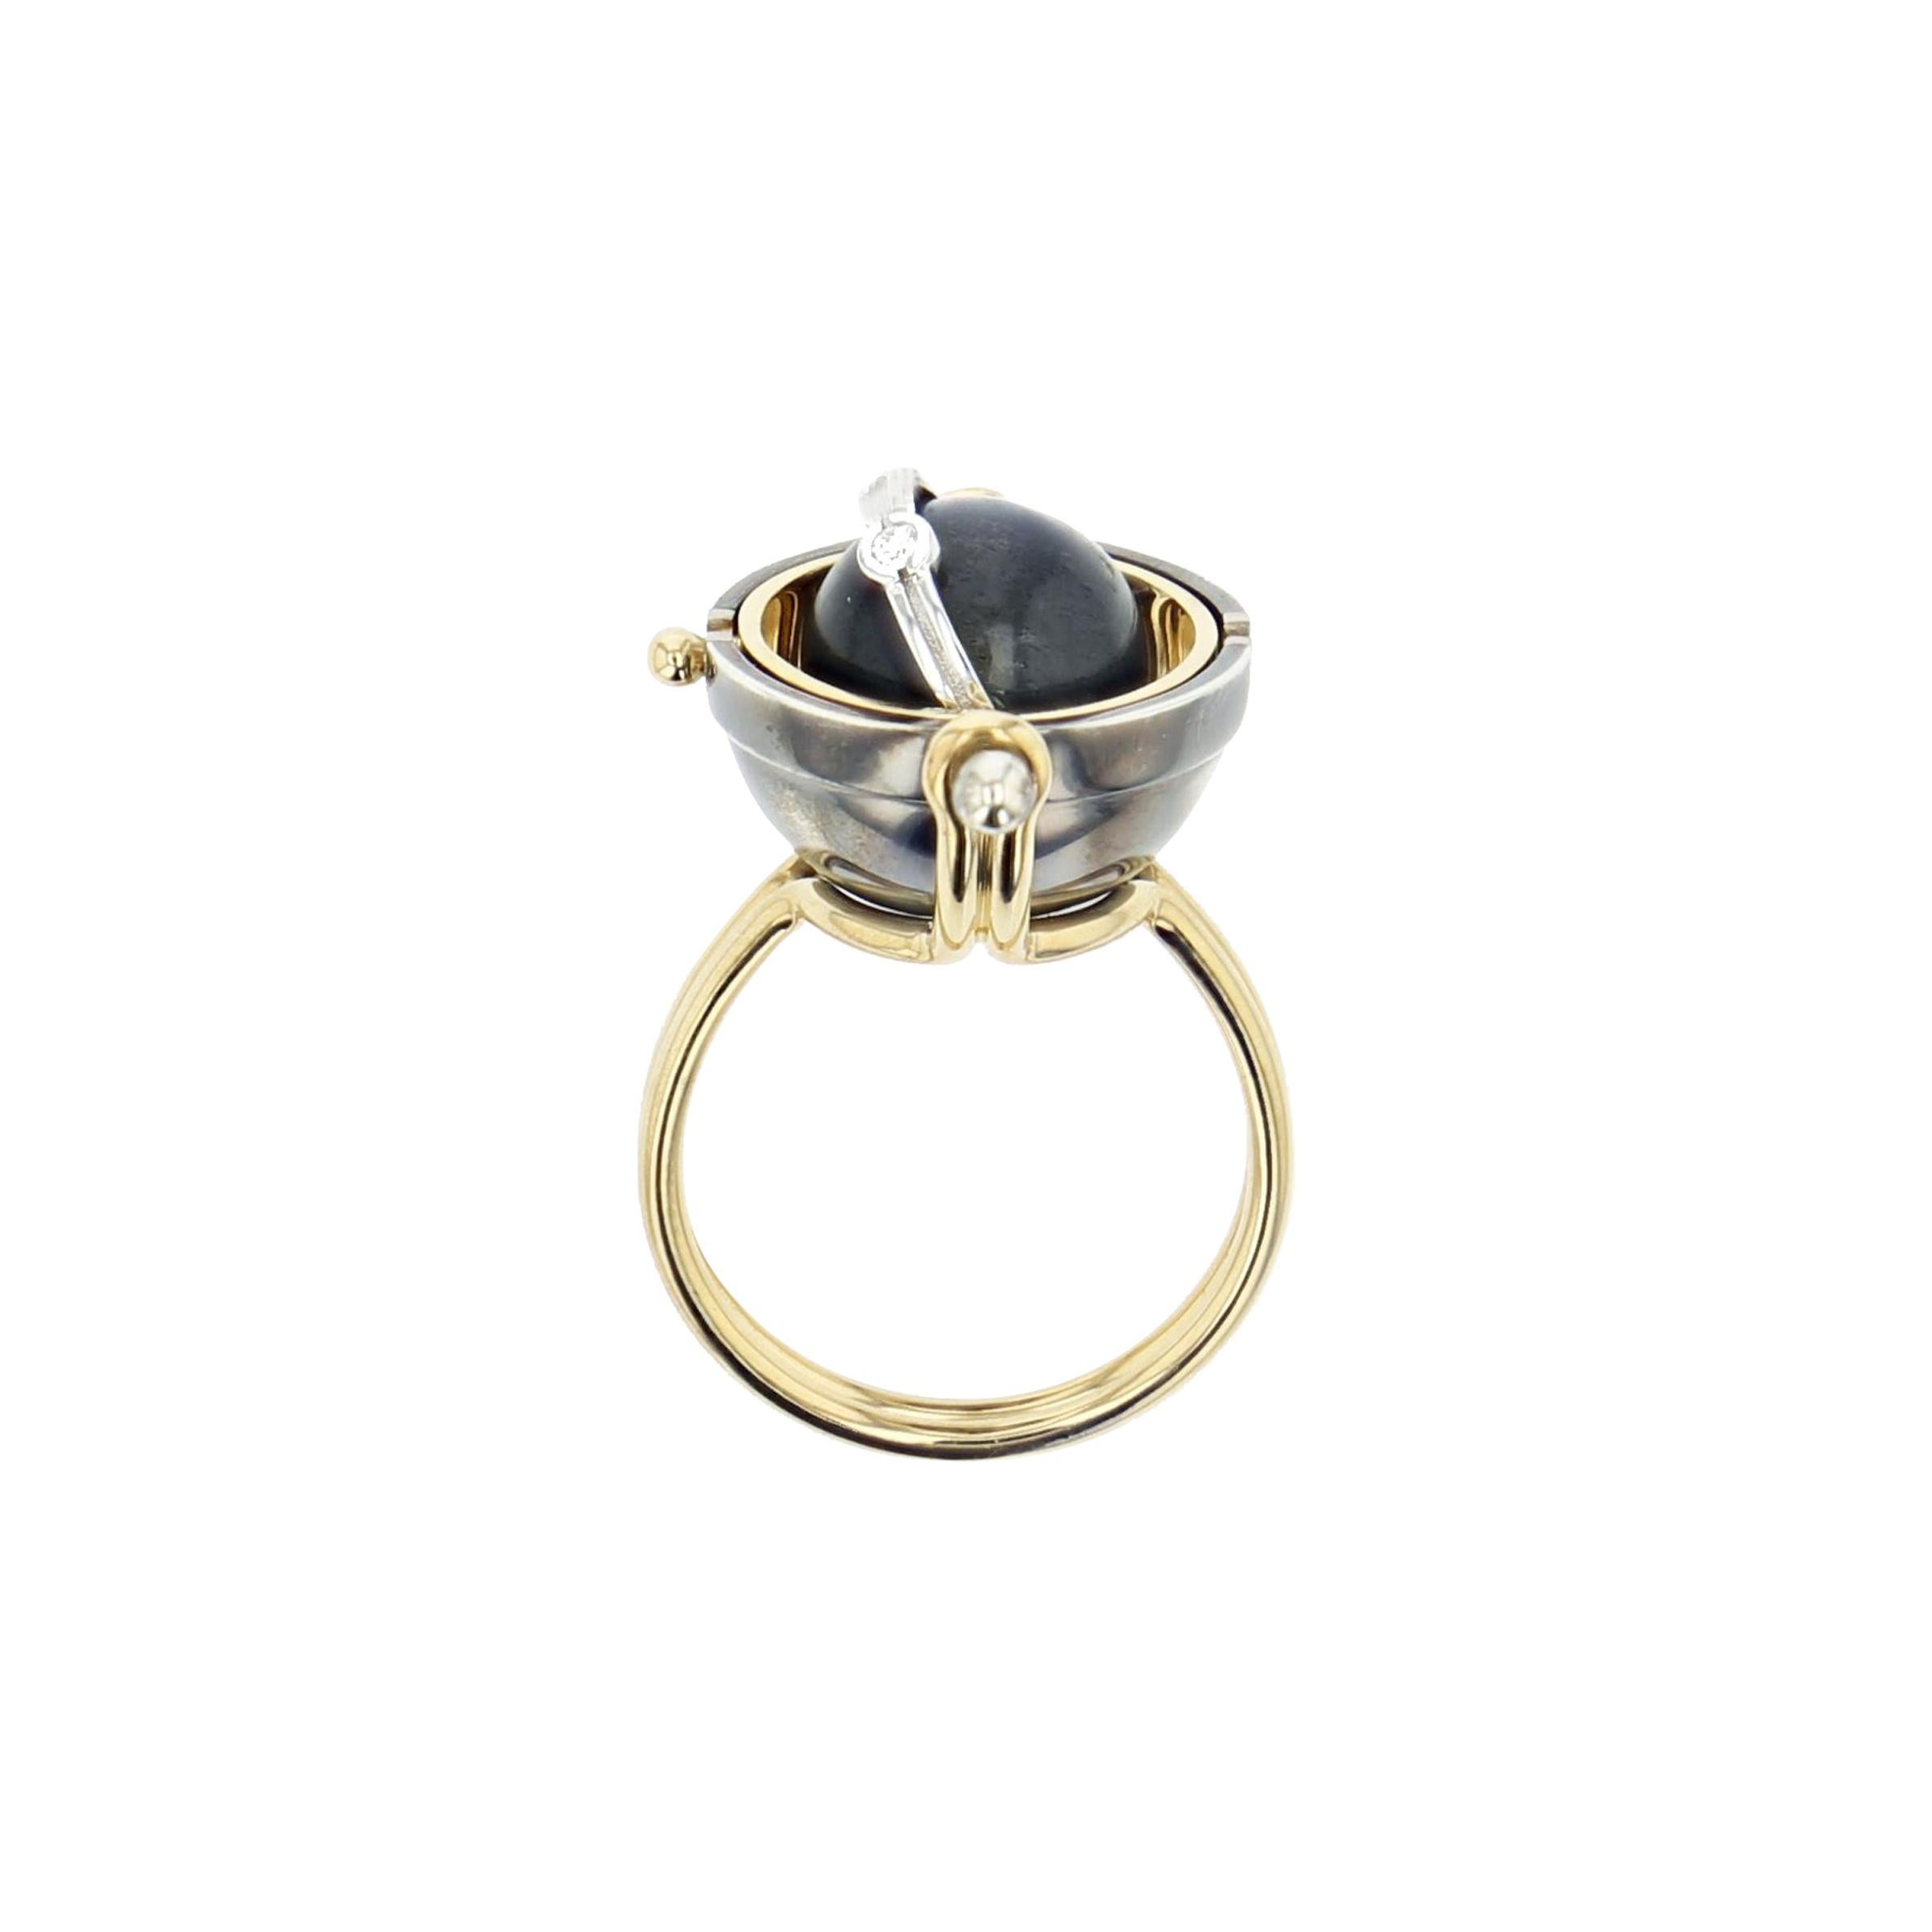 Labradorite Diamond Sphere Ring in 18k yellow gold by Elie Top